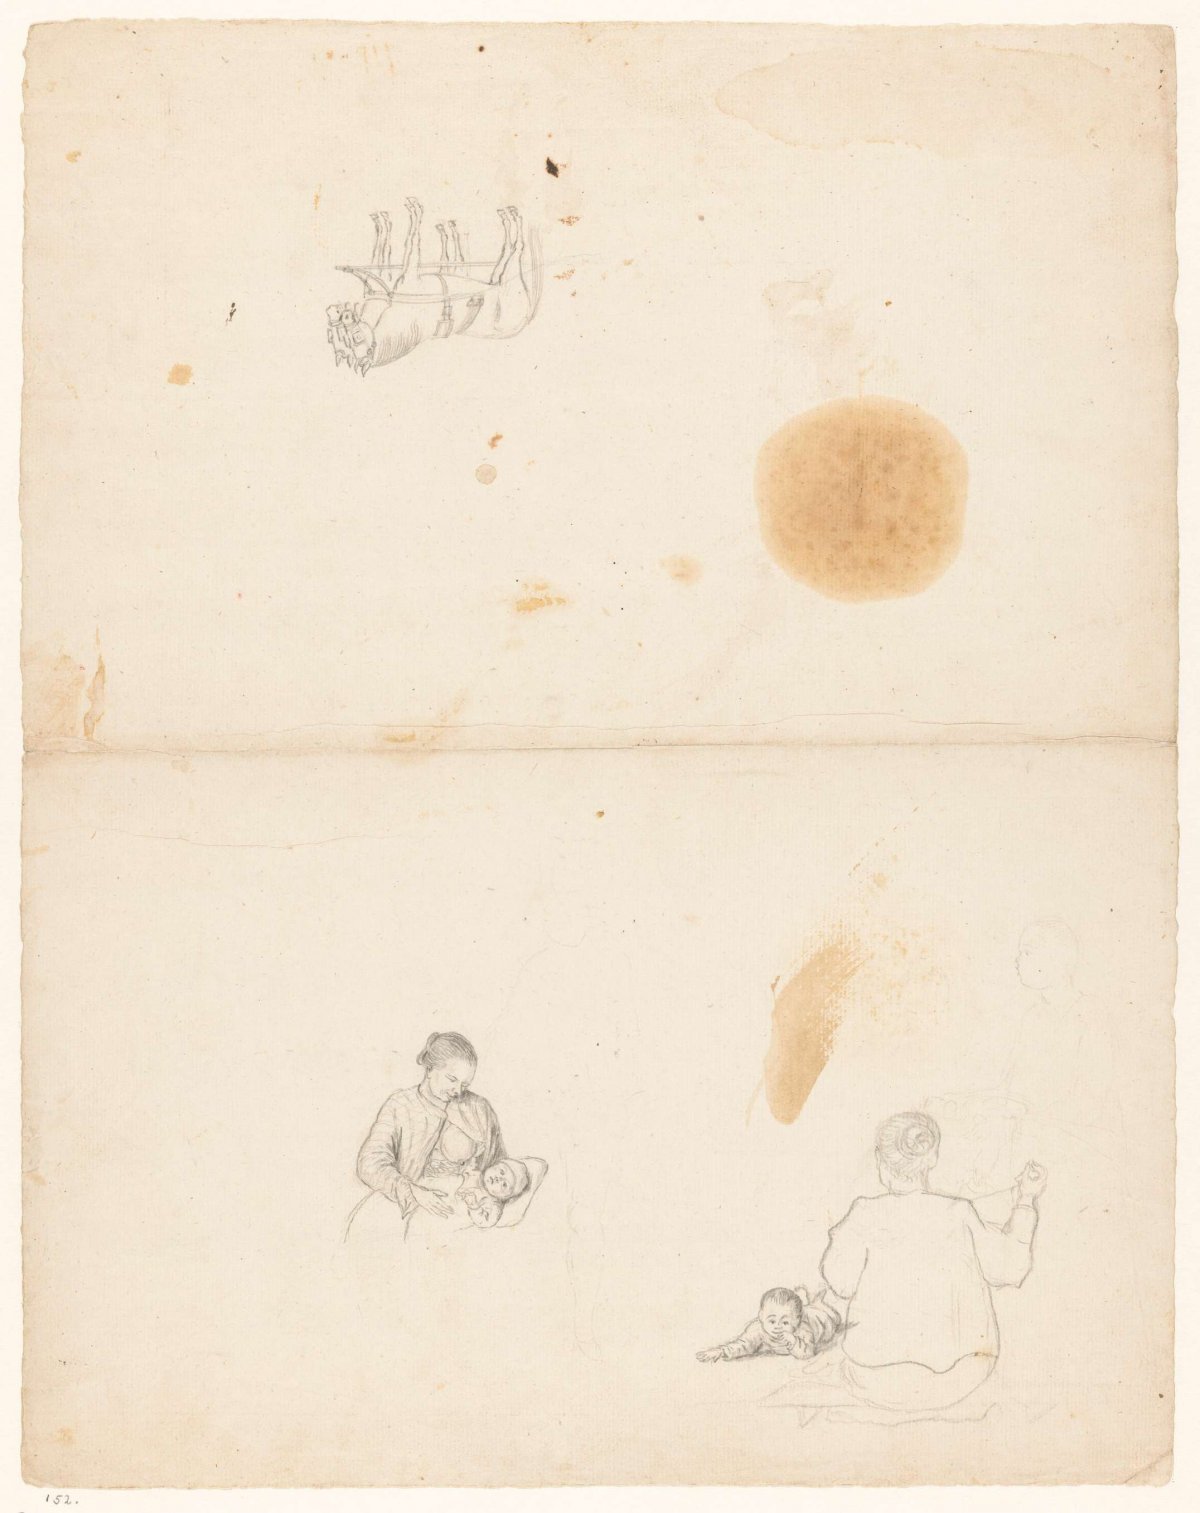 Sketches of woman with baby and horses at tiller tree, Jan Brandes, 1779 - 1785